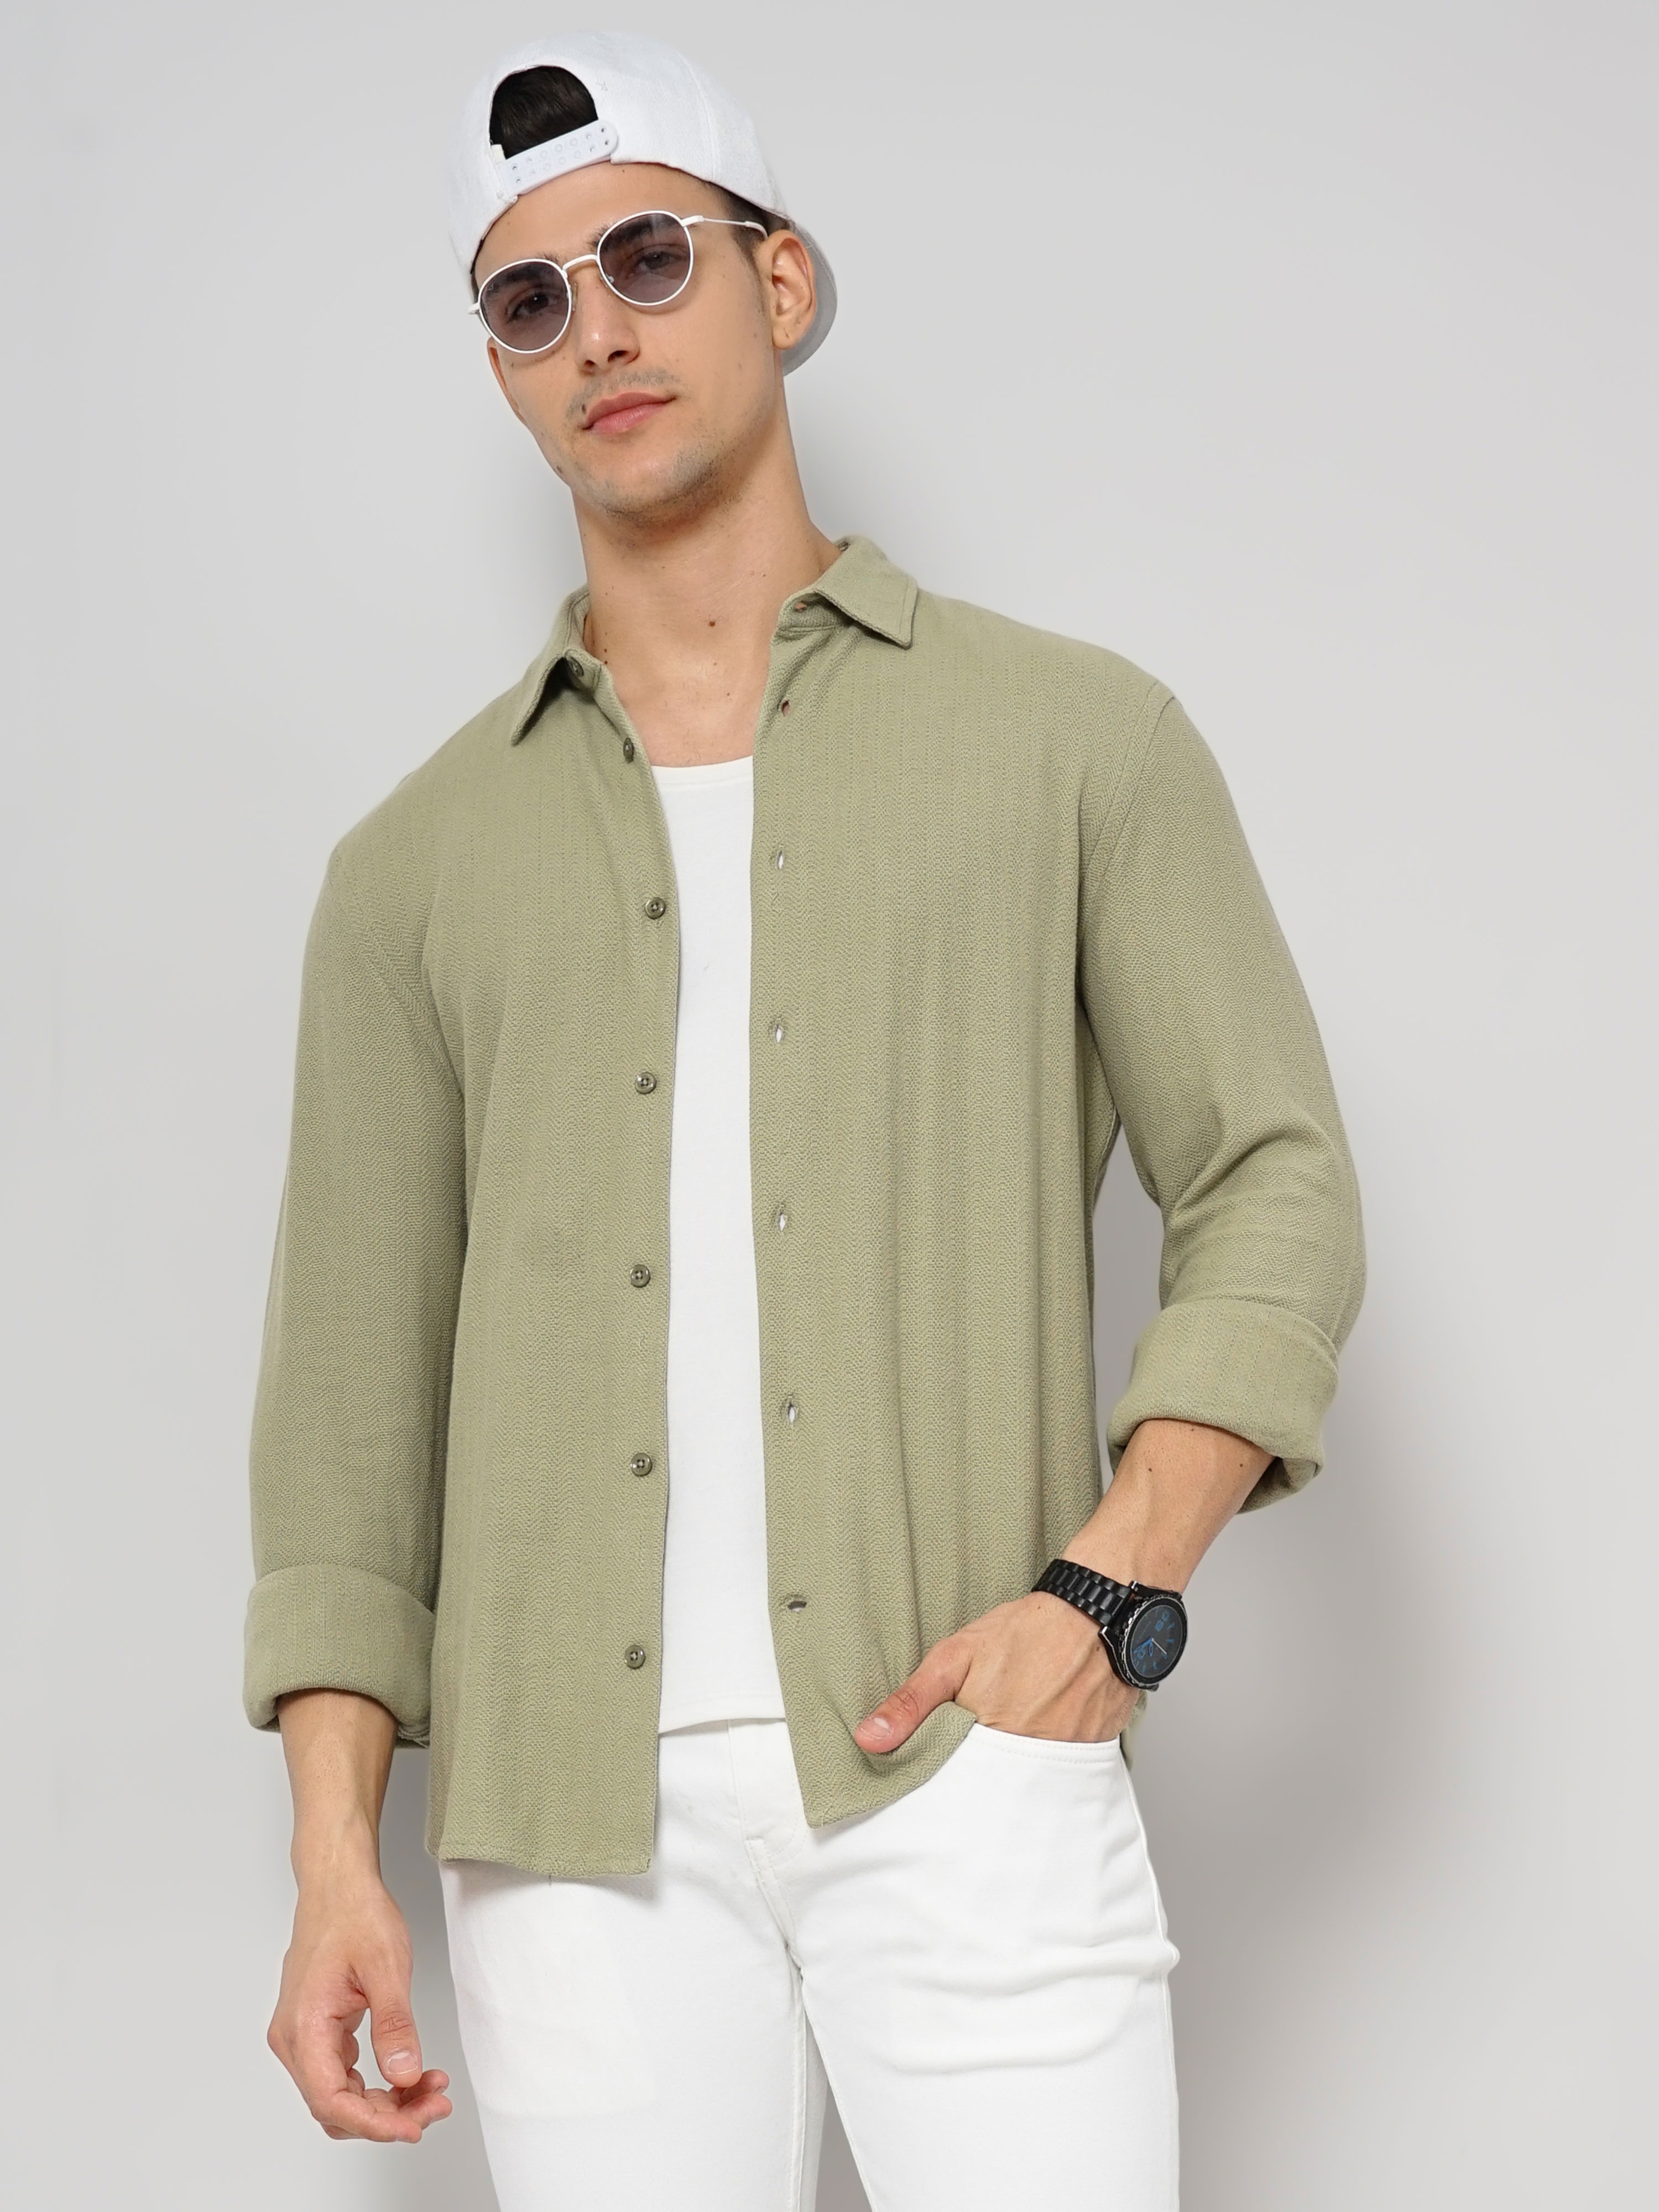 celio | Men's Green Solid Casual Shirts